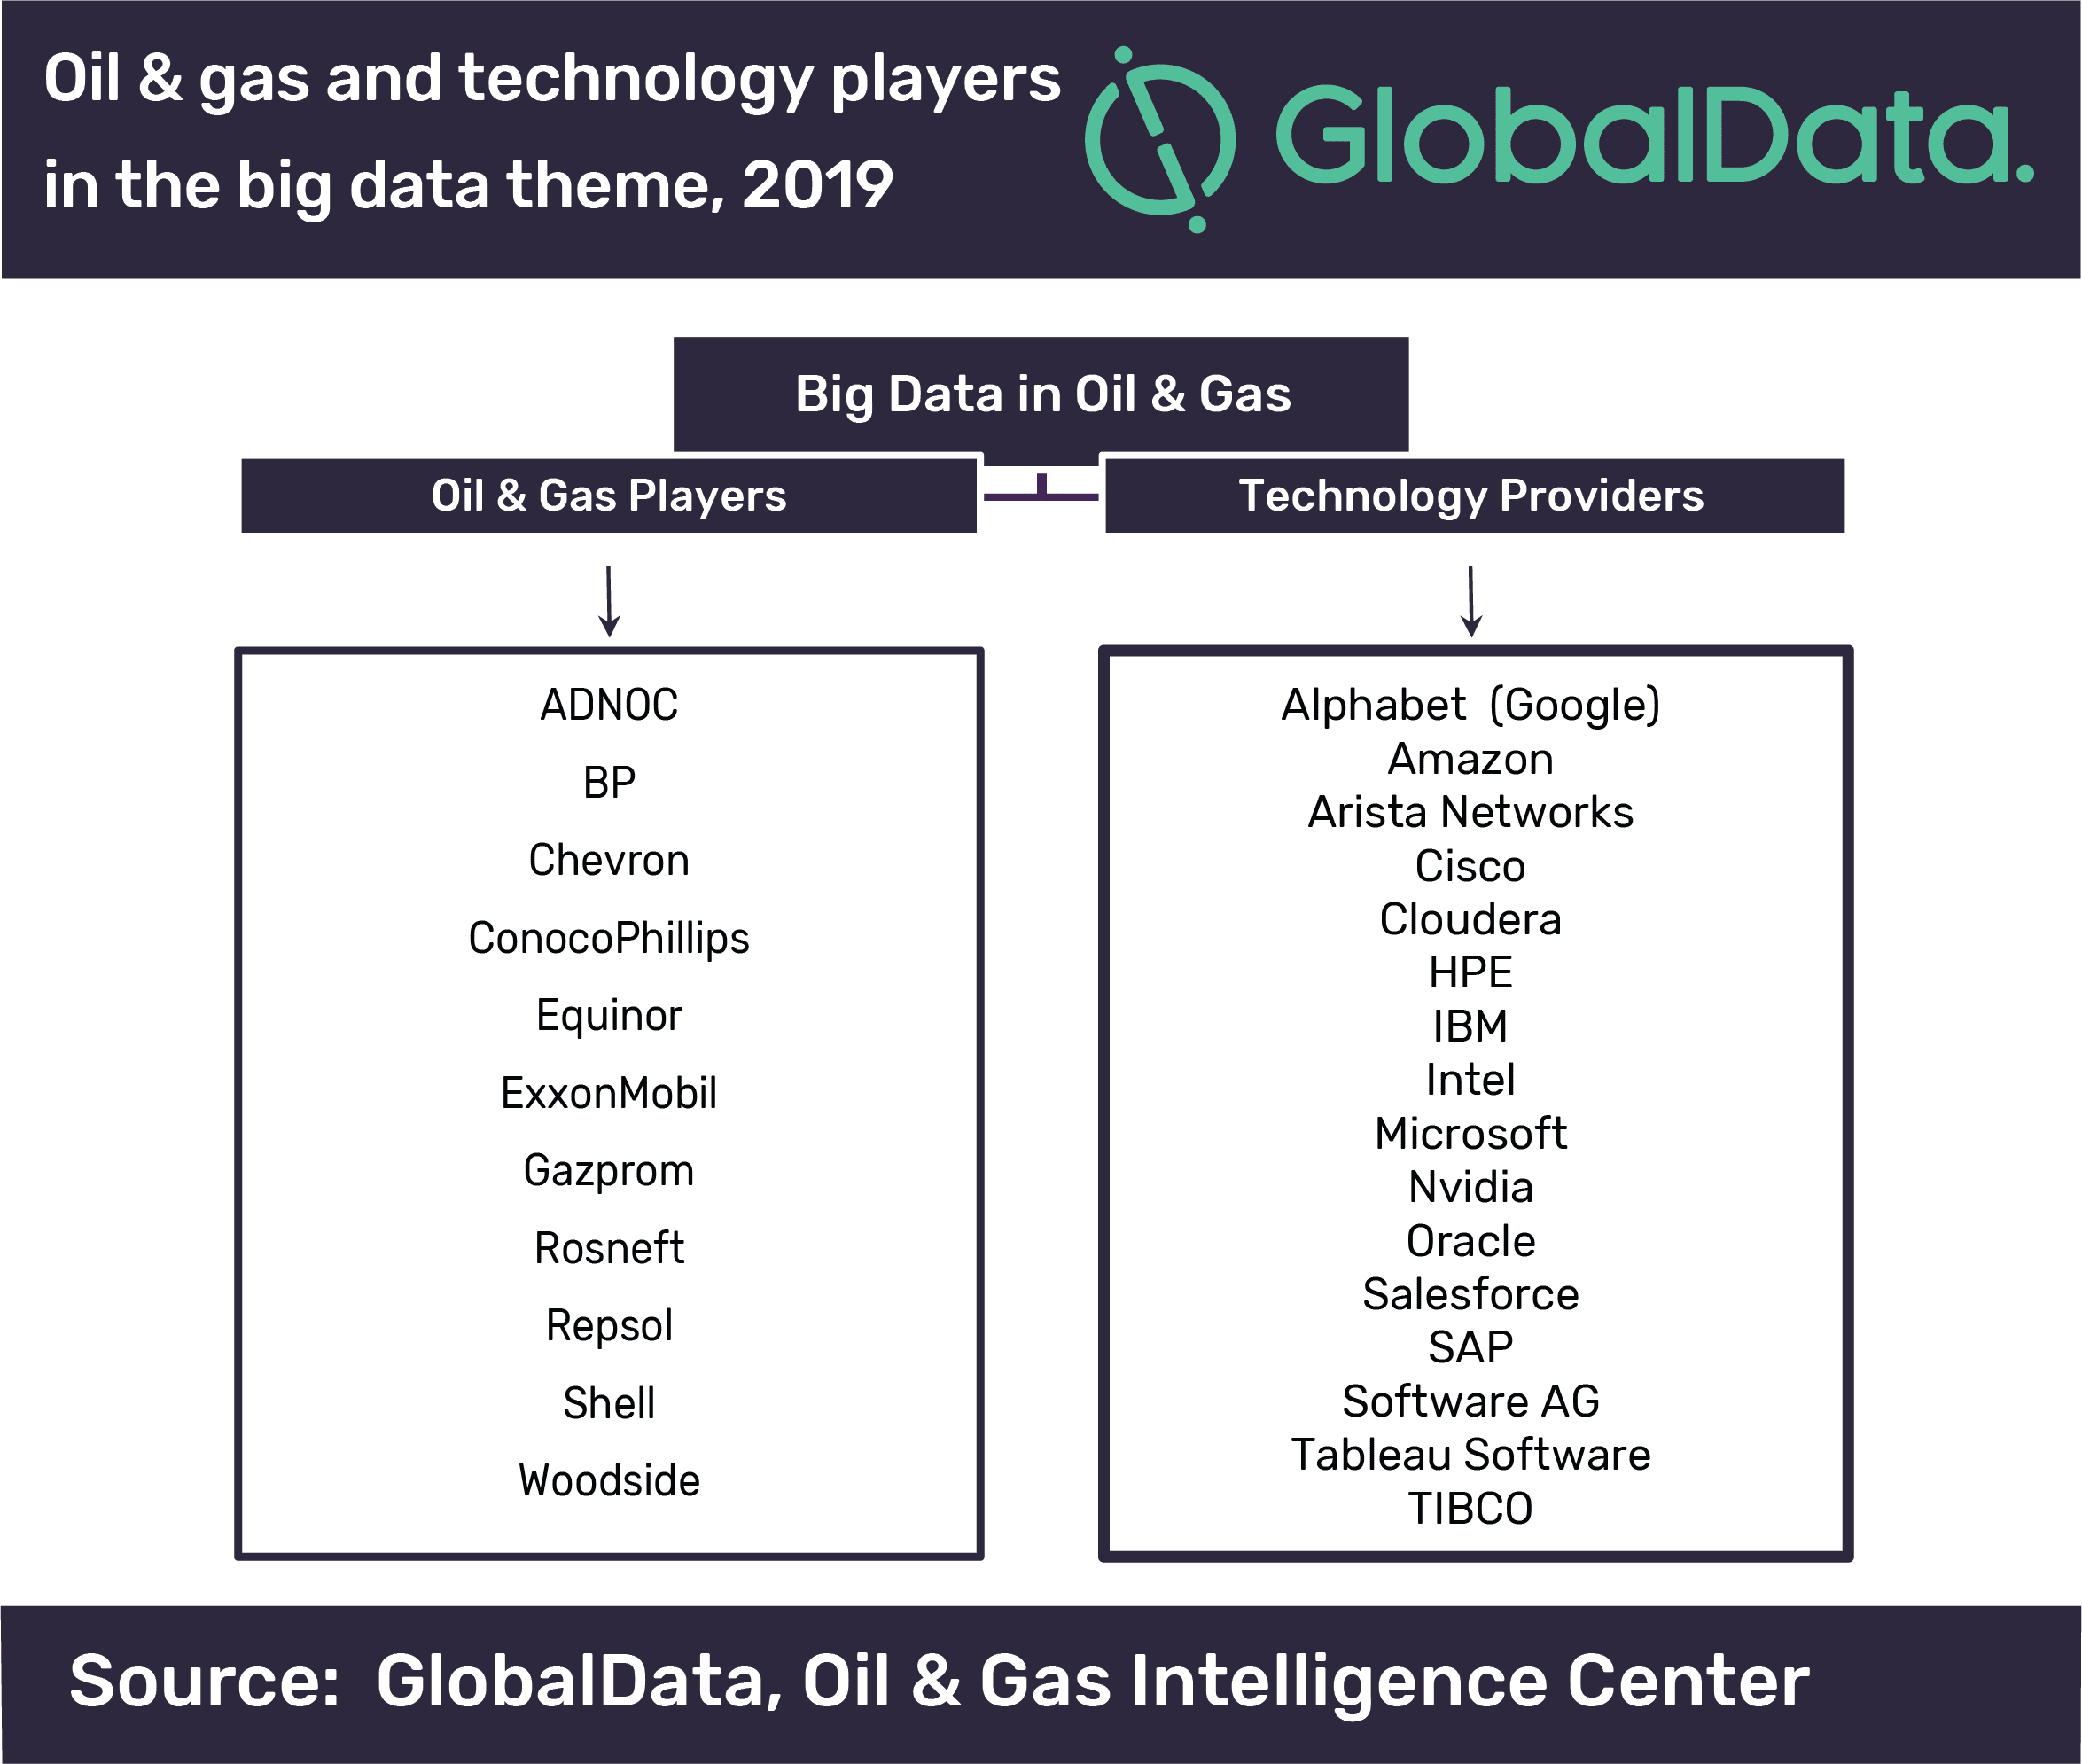 Sheer volume of data being created by oil and gas companies driving adoption of big data